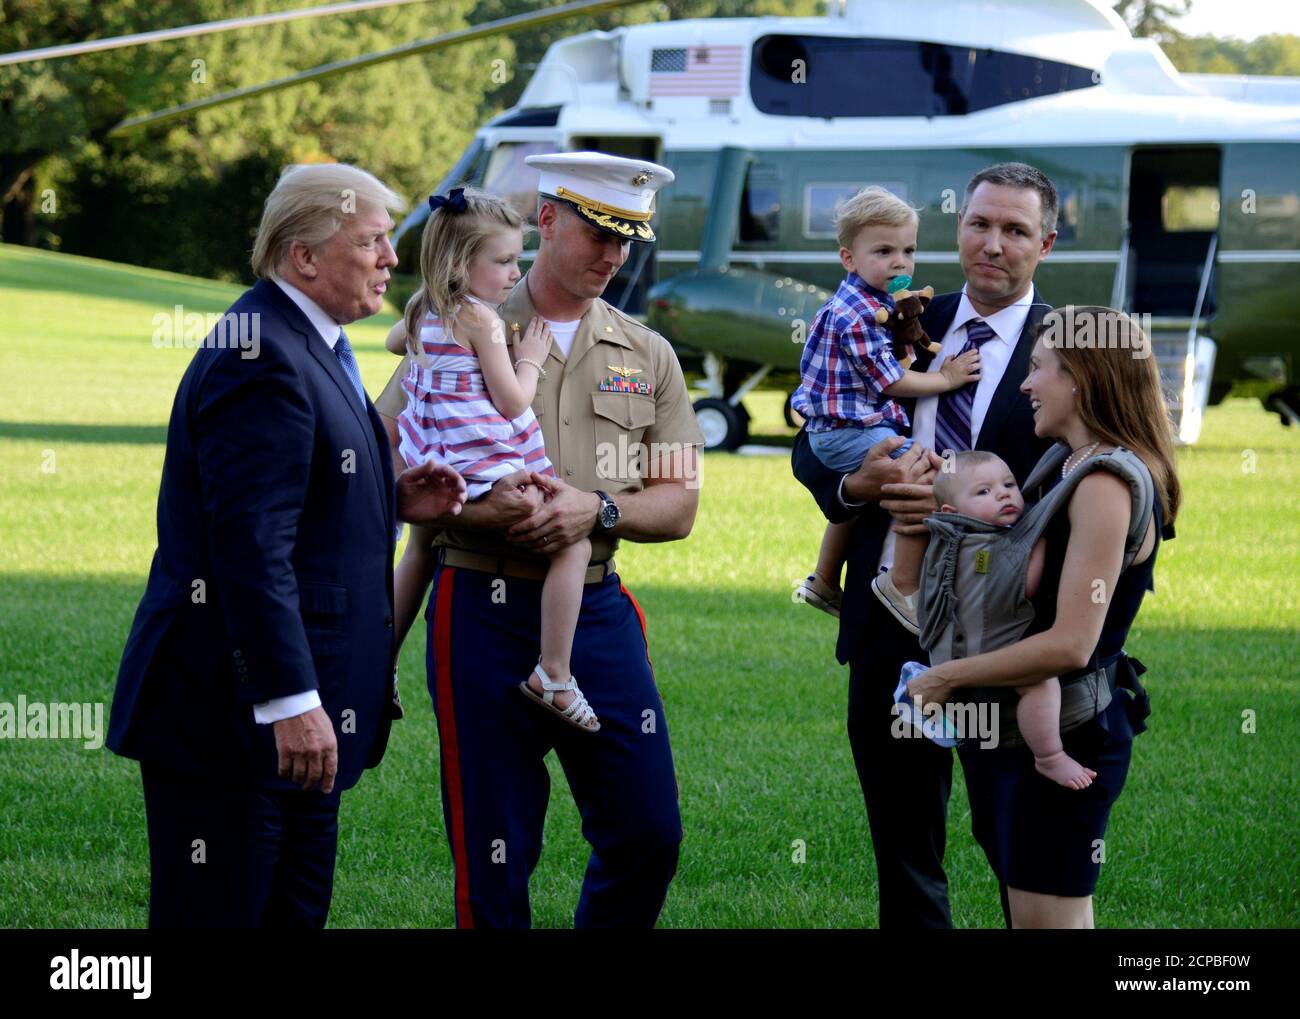 U.S. President Donald Trump (L) welcomes the family of U.S. Marine Corps Maj. James Thompson, Jr., holding his daughter, London, 3, along with his wife Lynel, who is holding 7-month old son Joel, and brother Matt, who is holding son James III, as he announces Thompson's last Marine One flight, on his return to the White House, Washington, DC, U.S., from a week at the UN General Assembly and the weekend at his Bedminster New Jersey Golf Club, September 24, 2017.           REUTERS/Mike Theiler Stock Photo